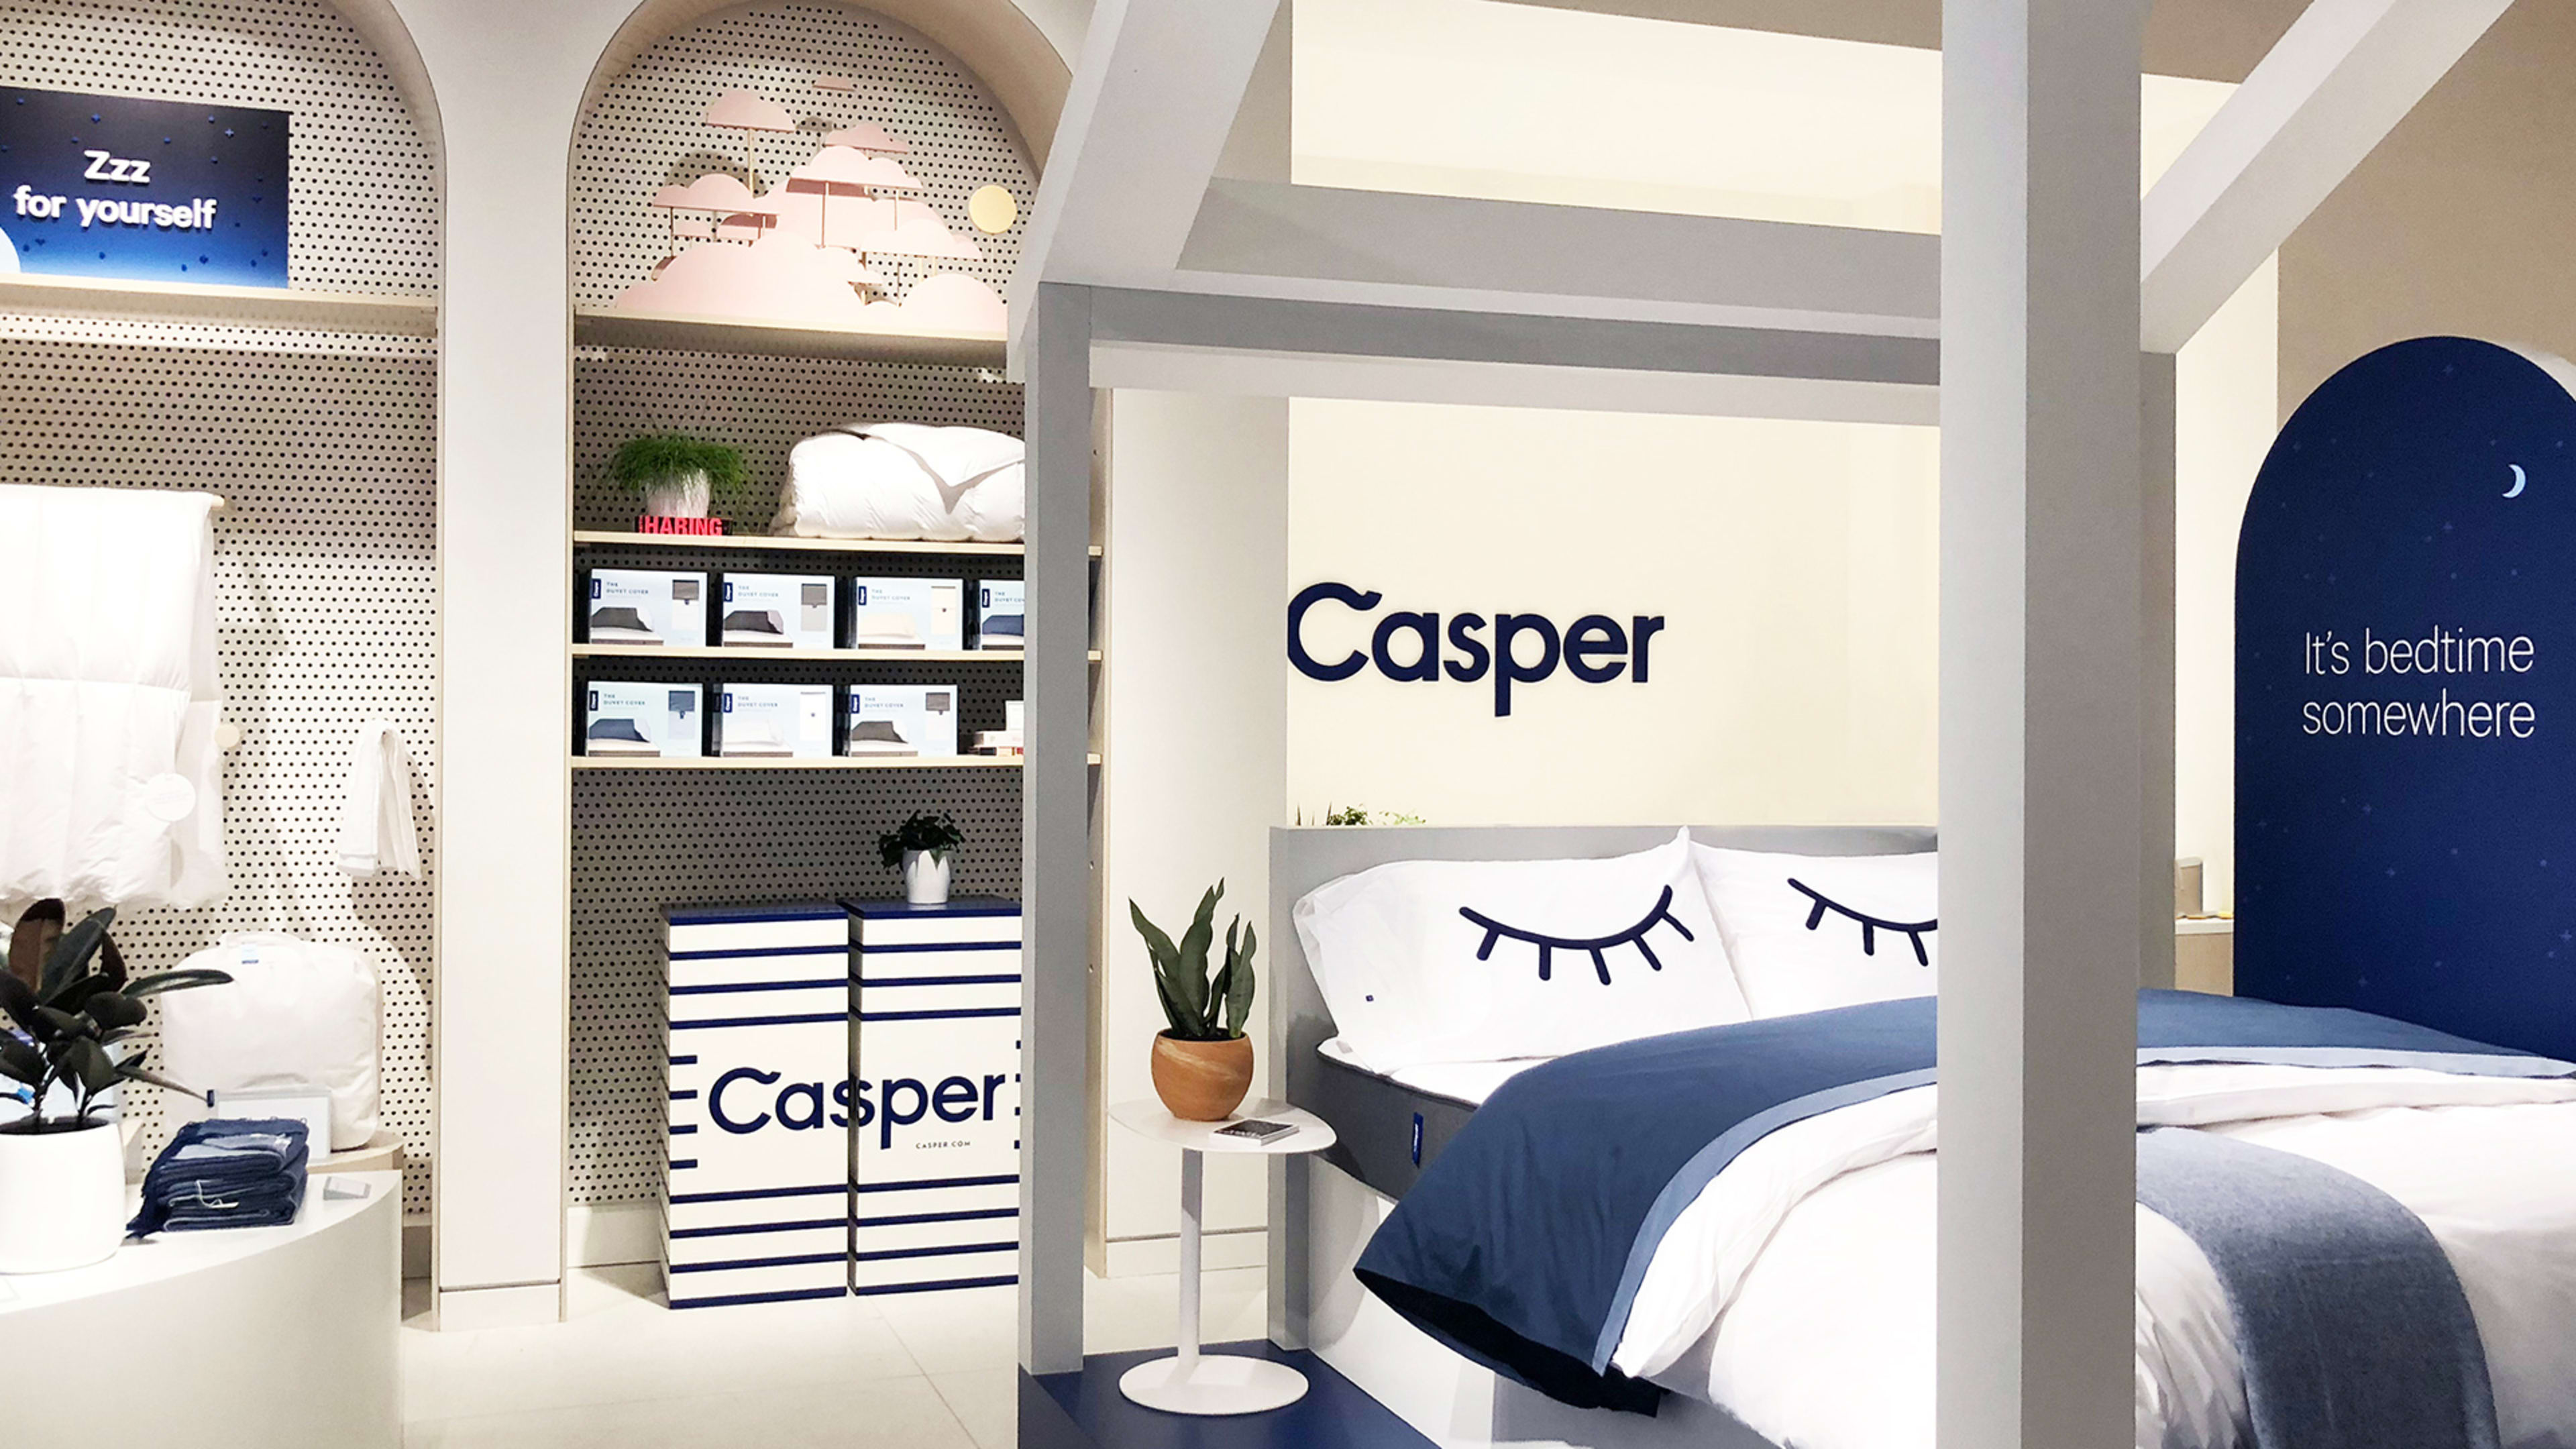 Casper just opened its first permanent store so you can take a nap in a miniature home